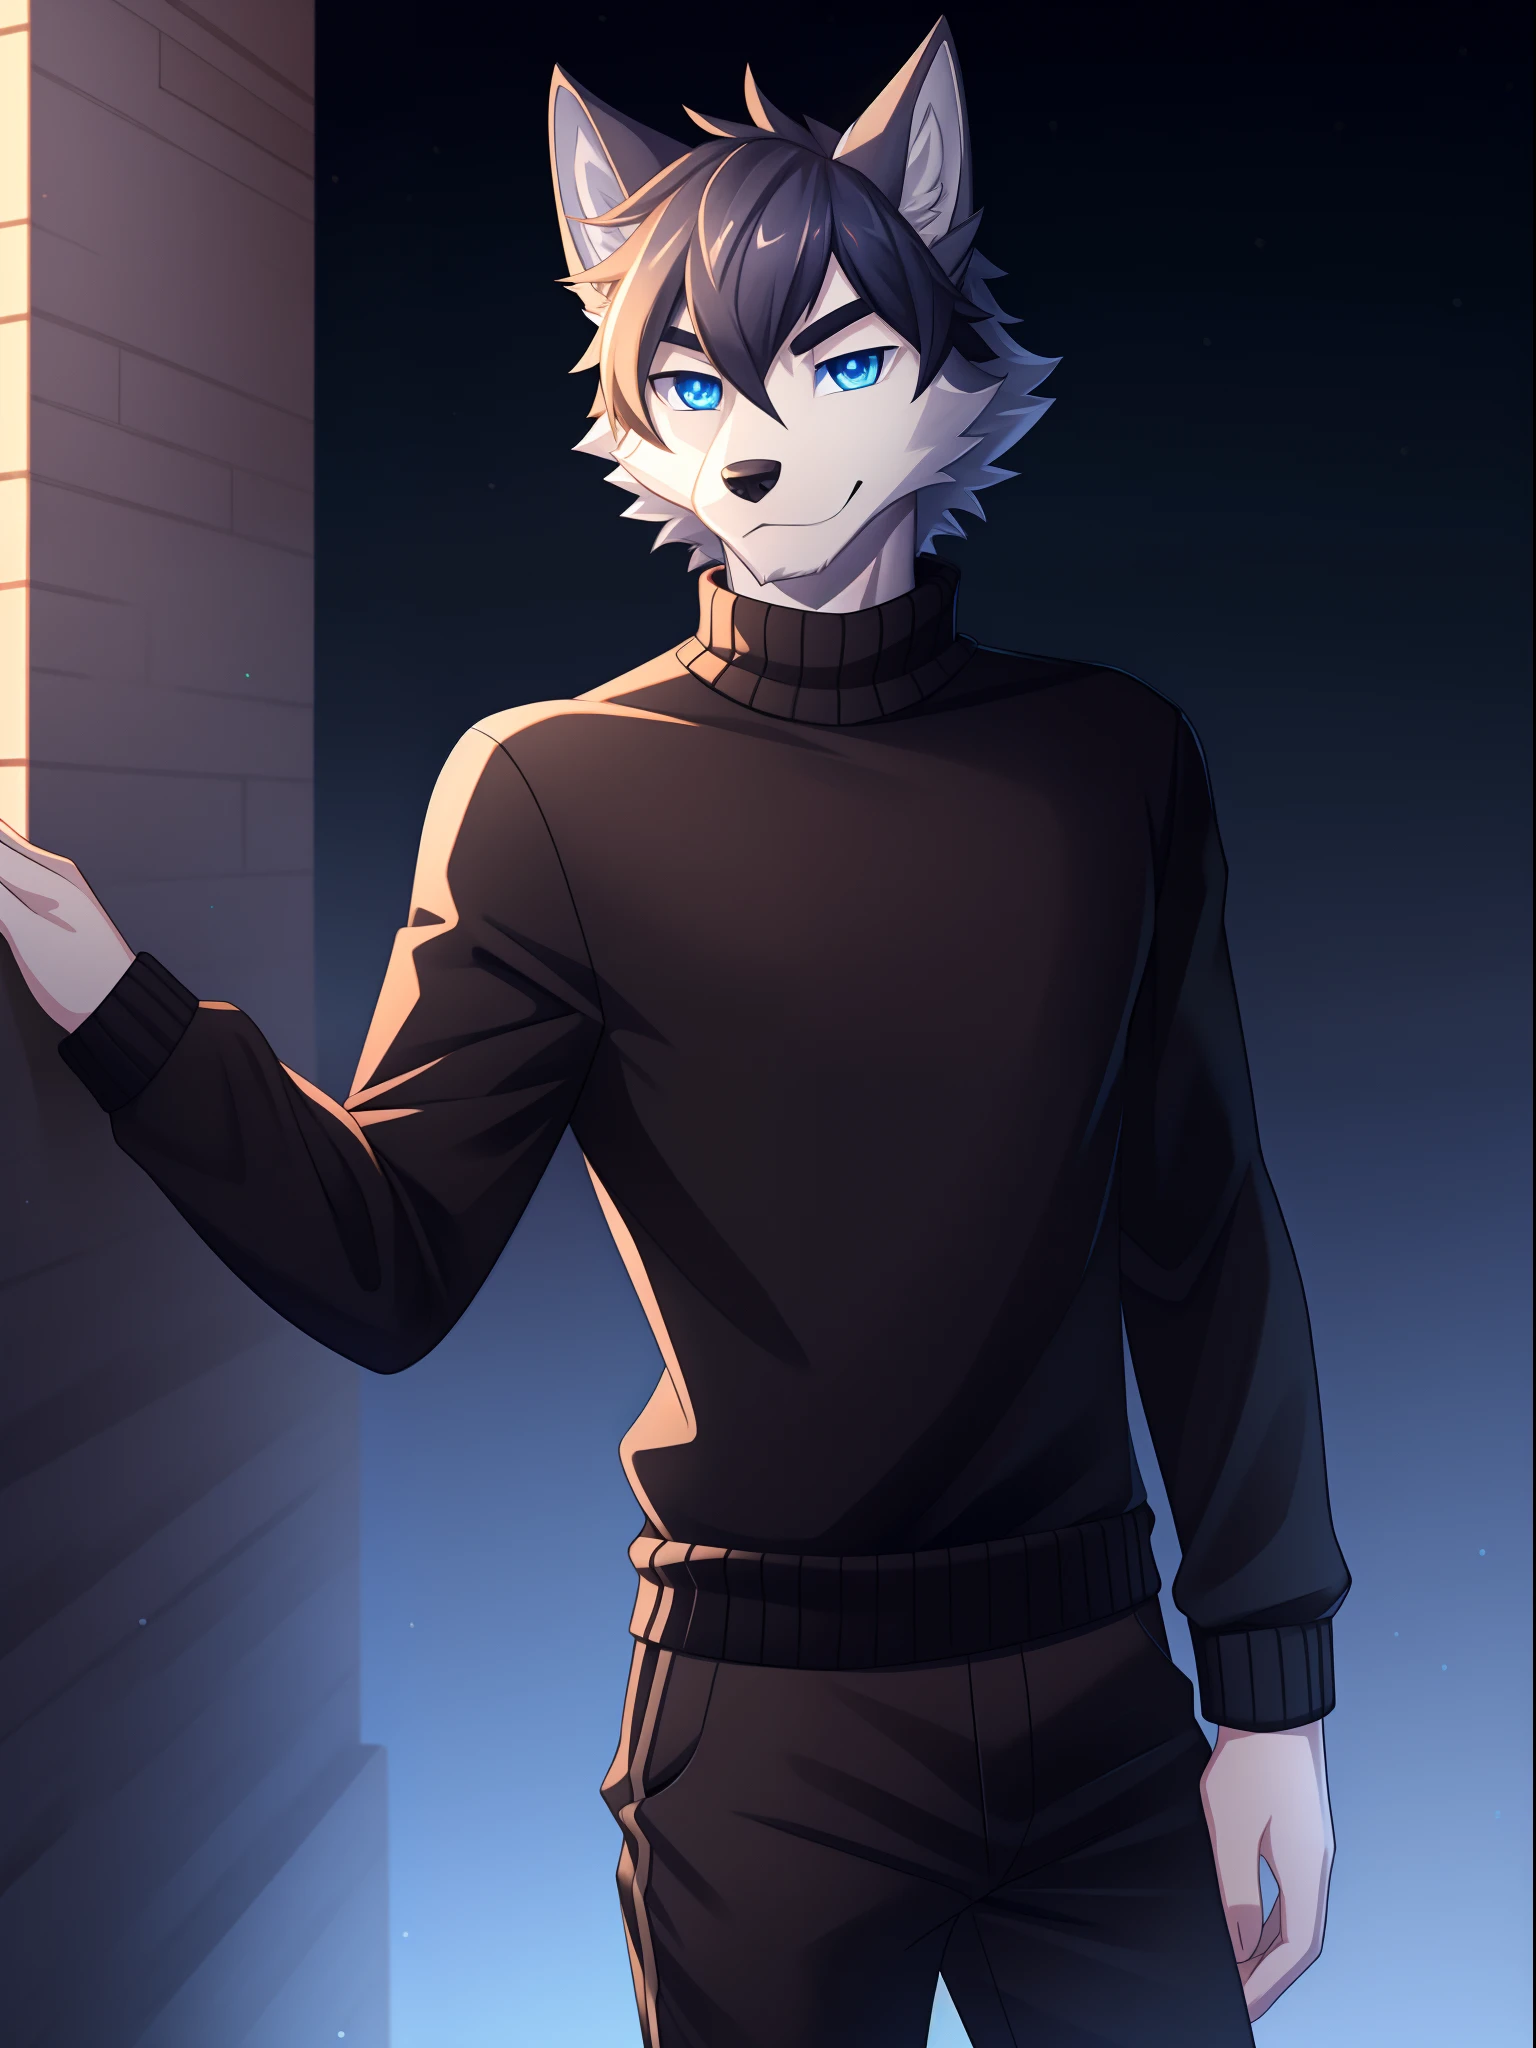 1guy, male wolf, furry, short hairstyle, anthropomorphic, blue eyes, Sharp eyes, beautiful eyes, handsome guy, with black sweater and long pants, sneackers, standing